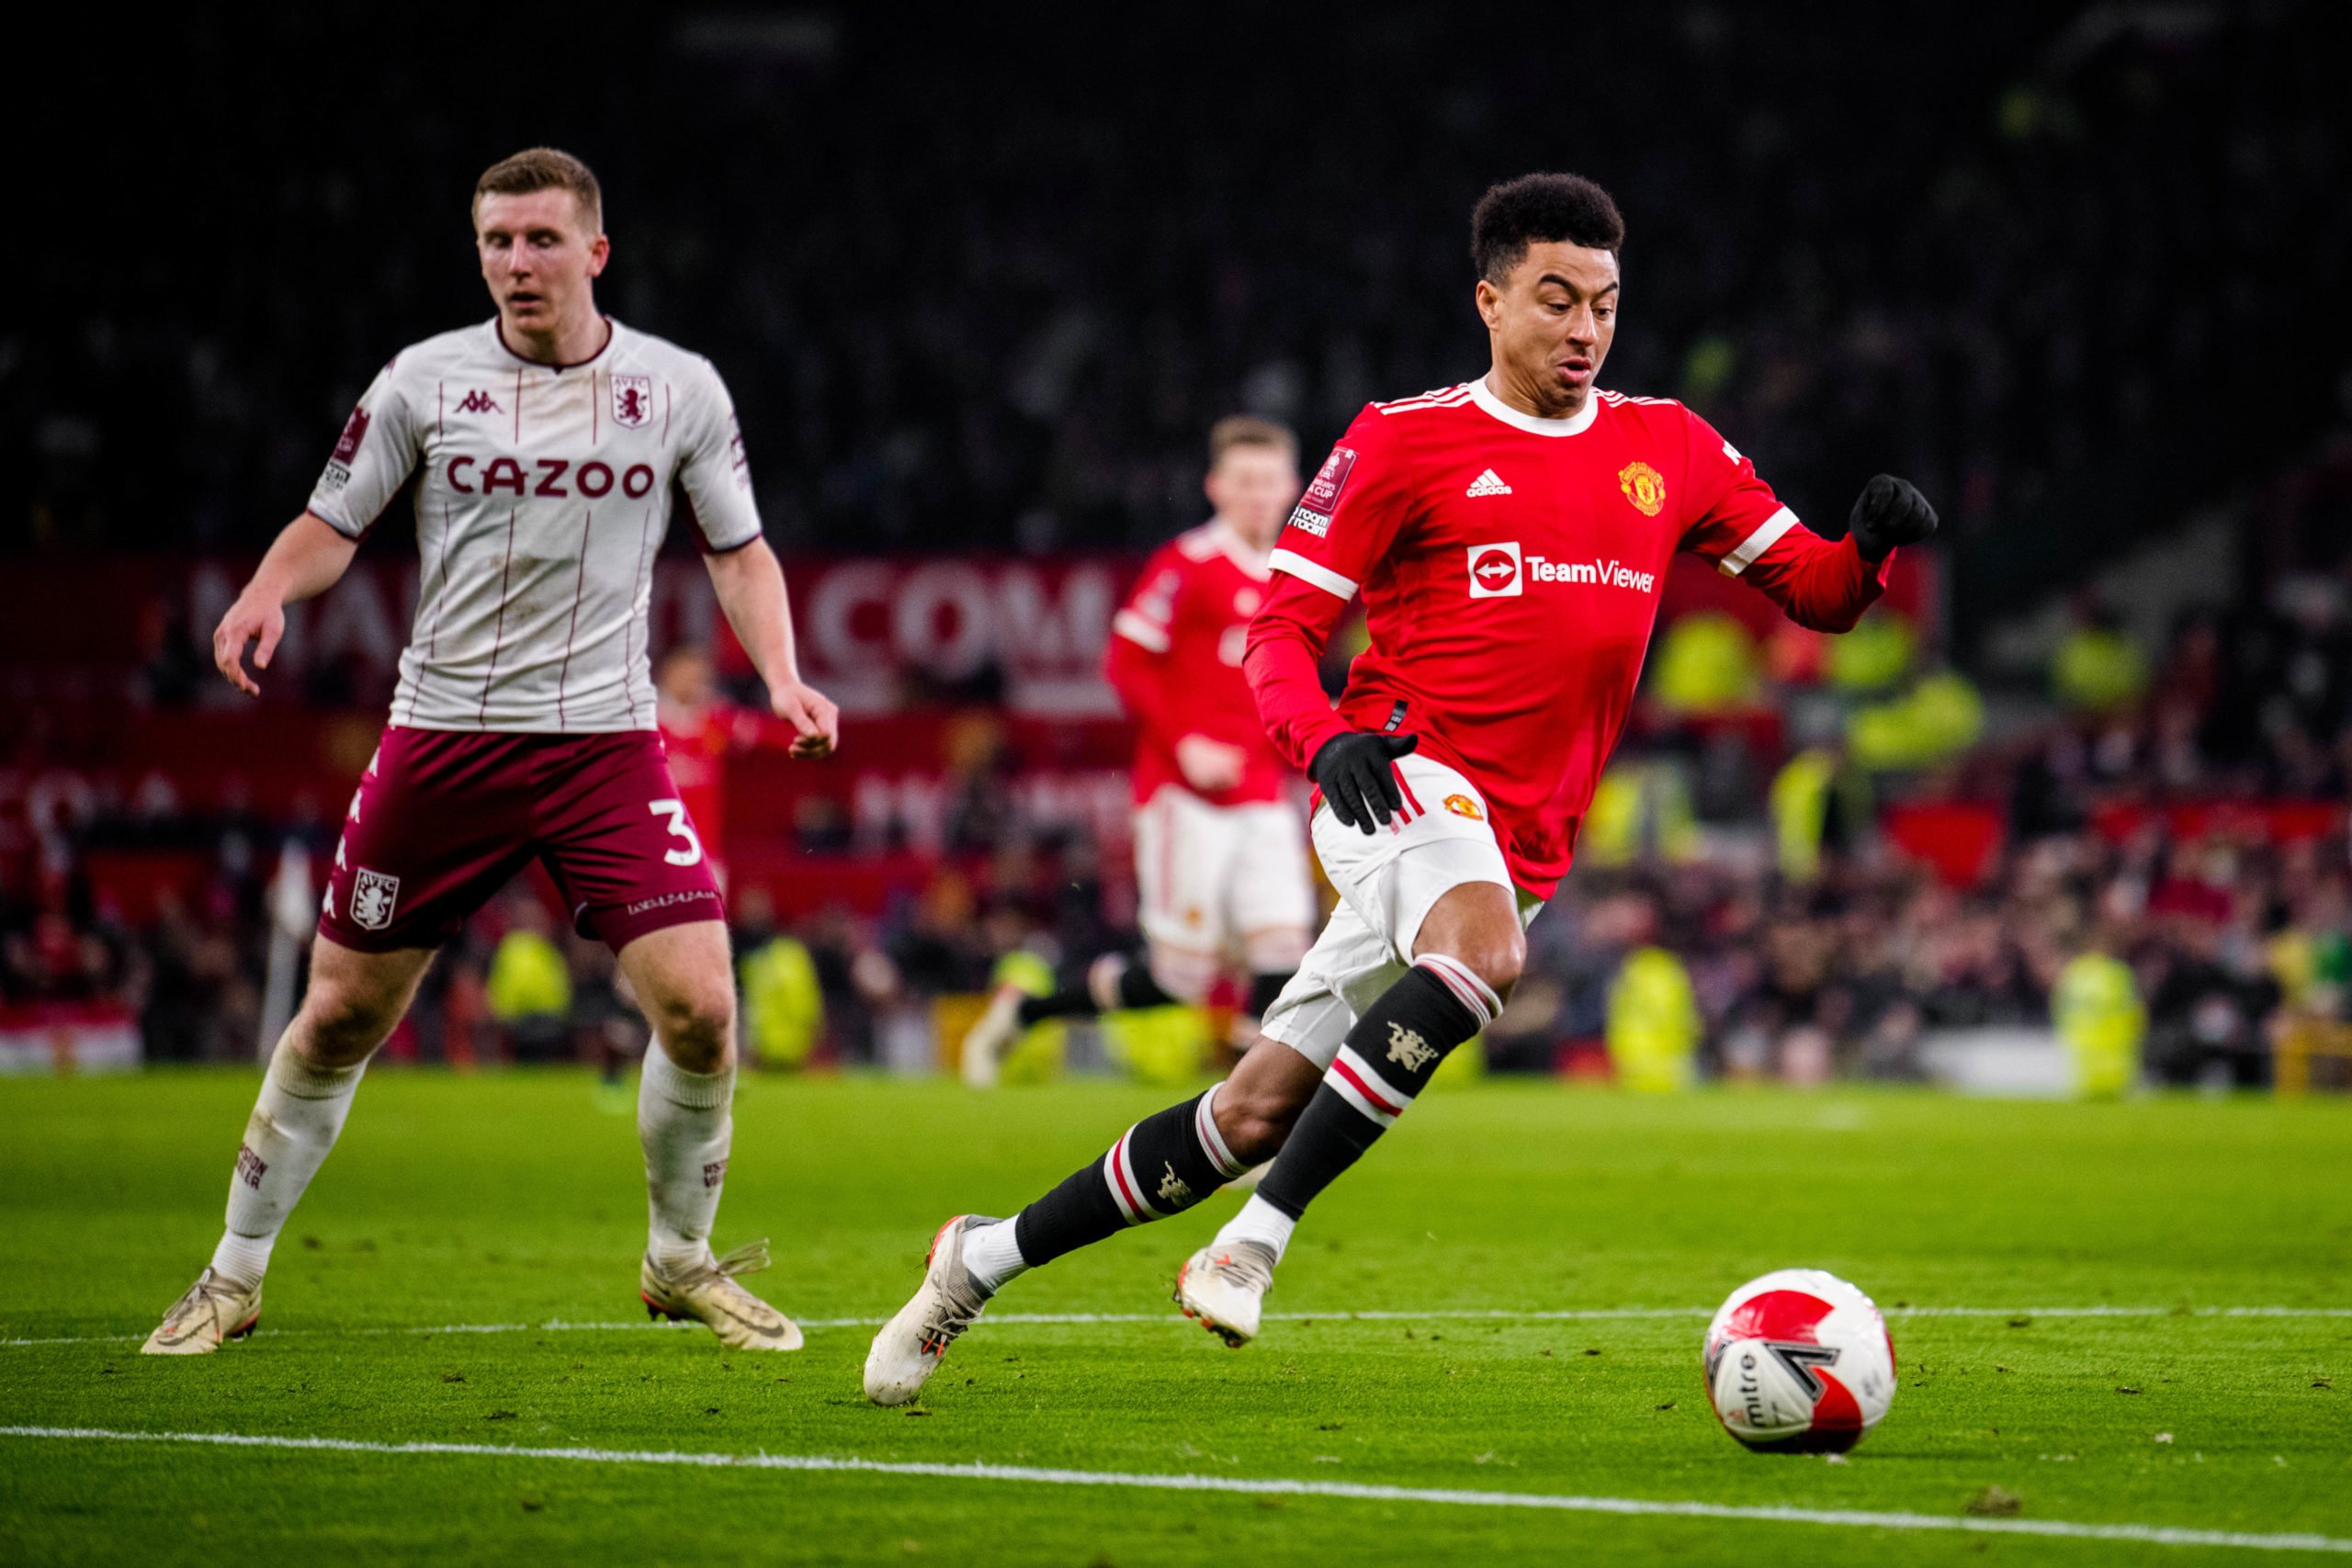 Amad enjoyed Jesse Lingard's moment of skill in win over Aston Villa